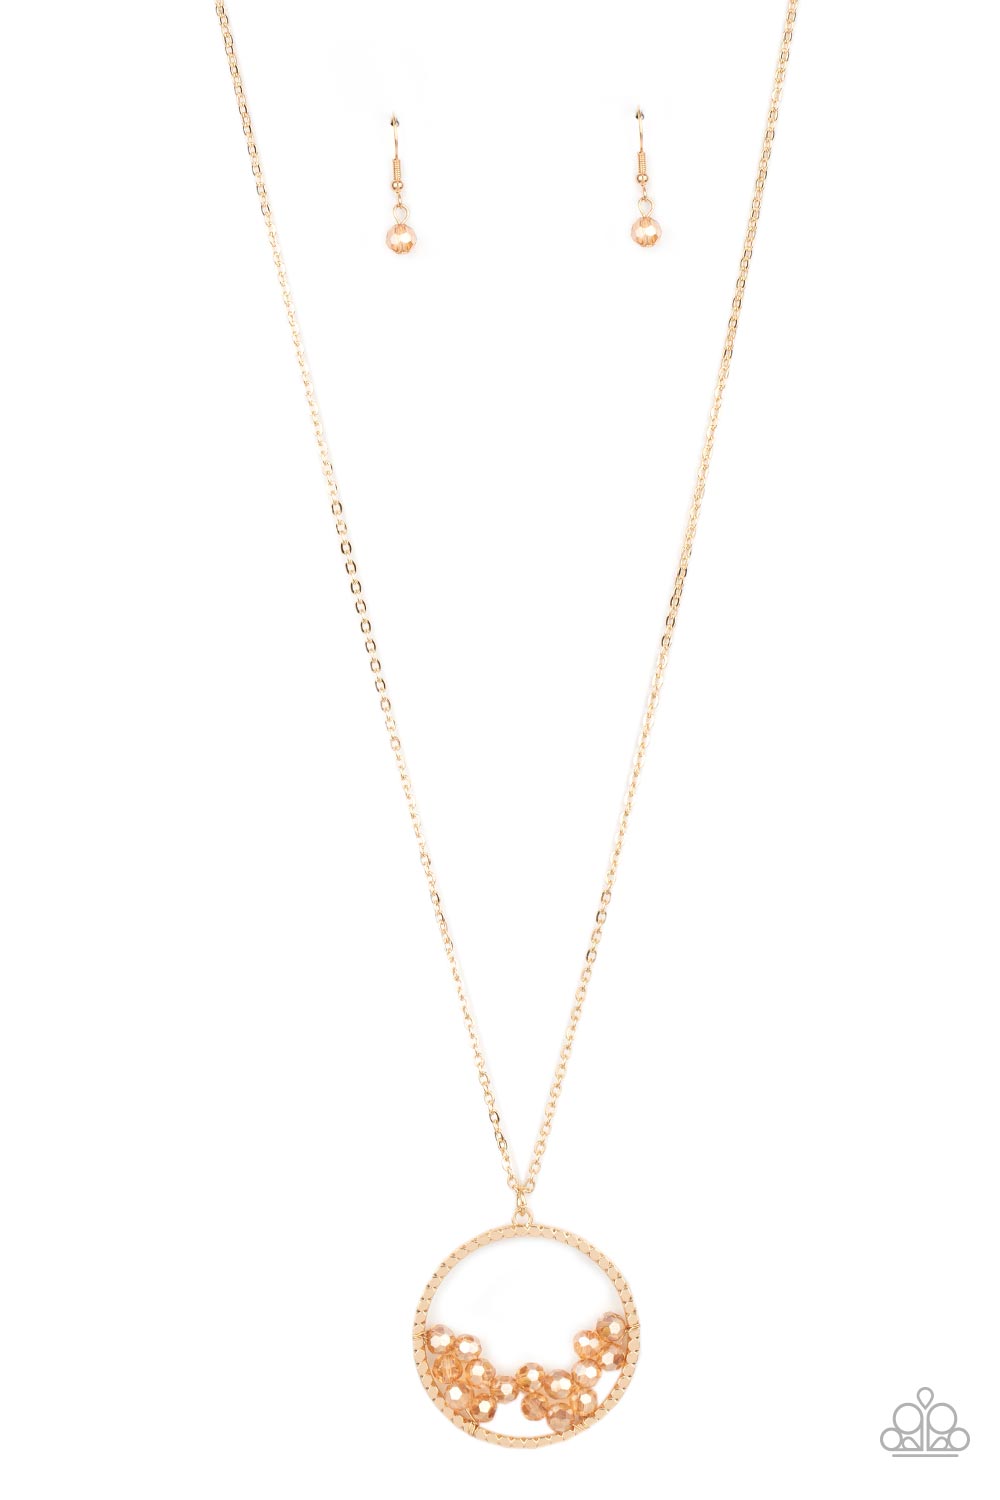 Galactic Glow Paparazzi Accessories Necklace with Earrings - Gold